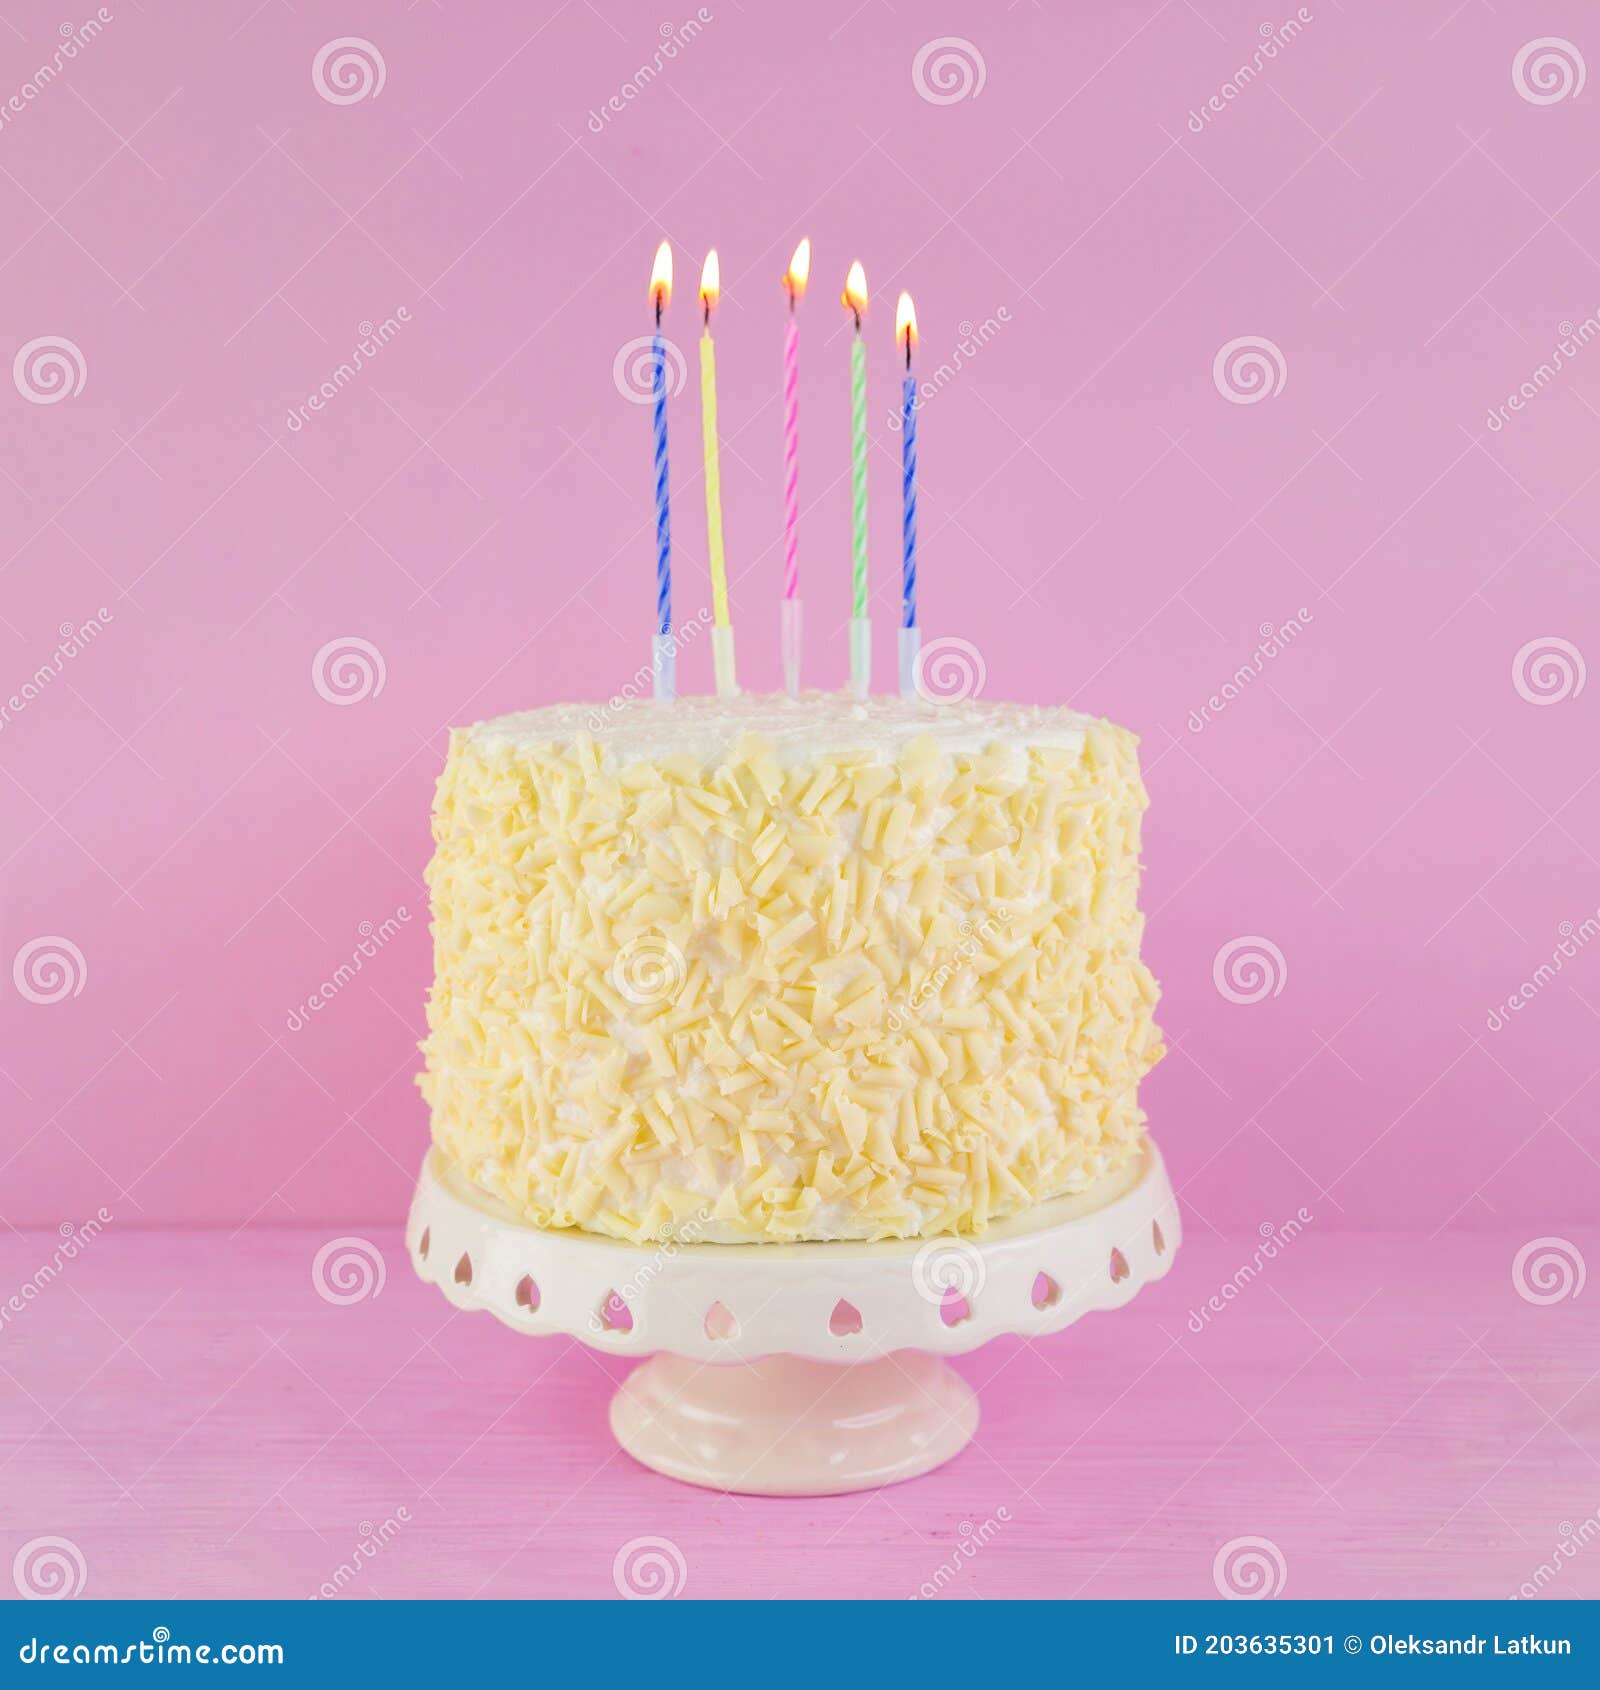 Discover 133+ cake bakery background best